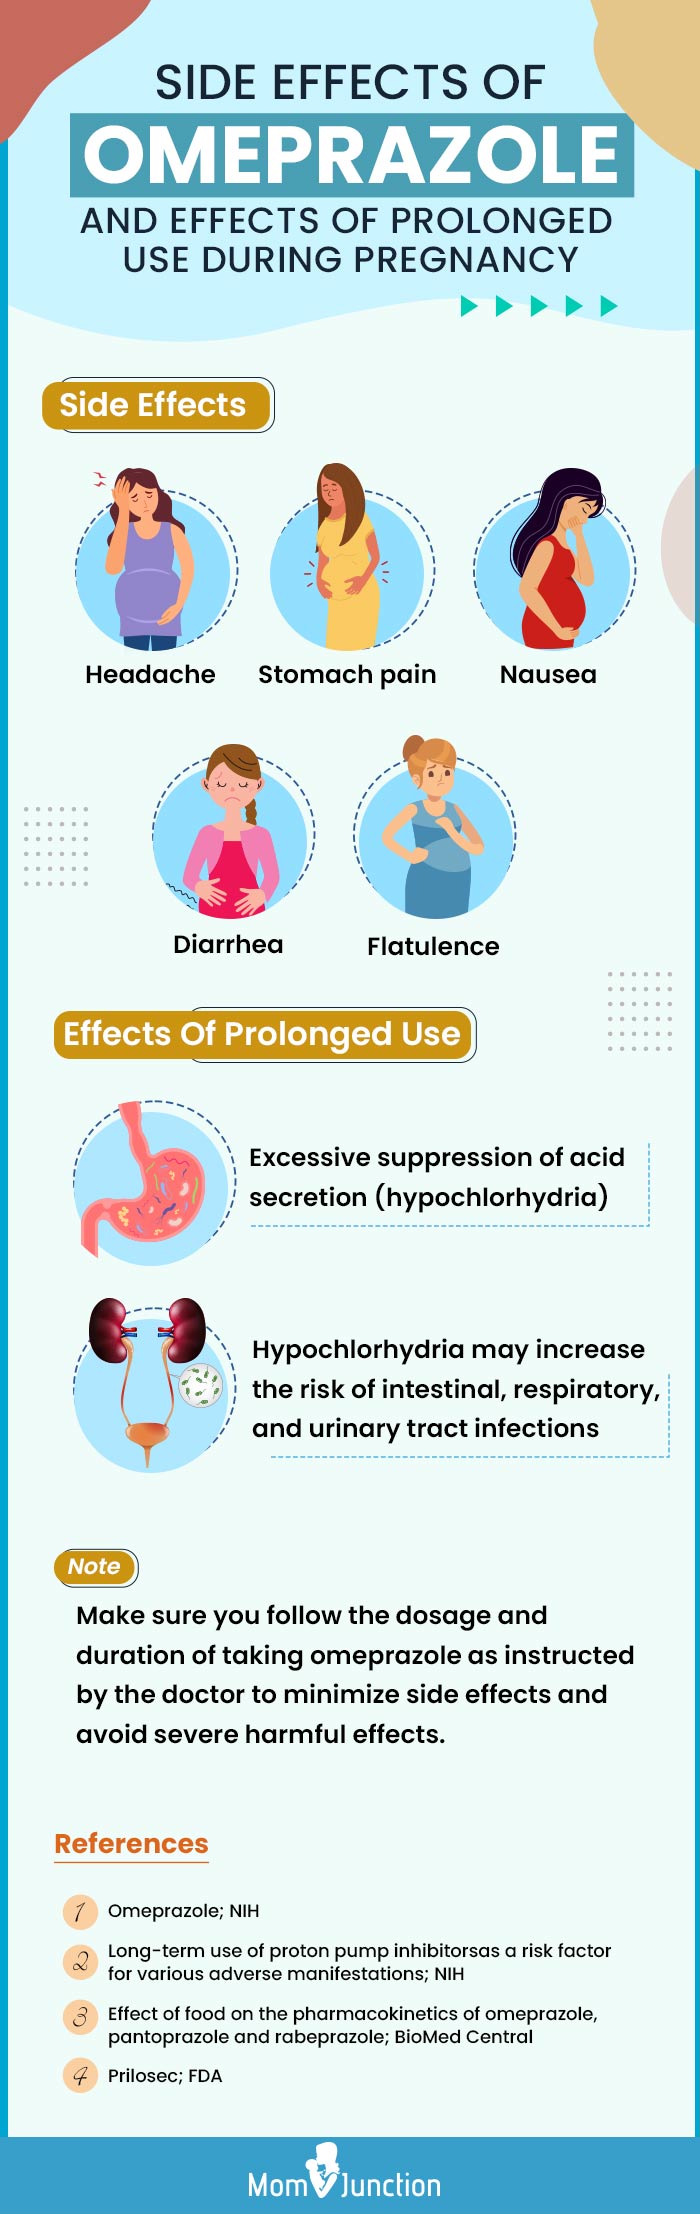 side effects and prolonged use of omeprazole during pregnancy (infographic)